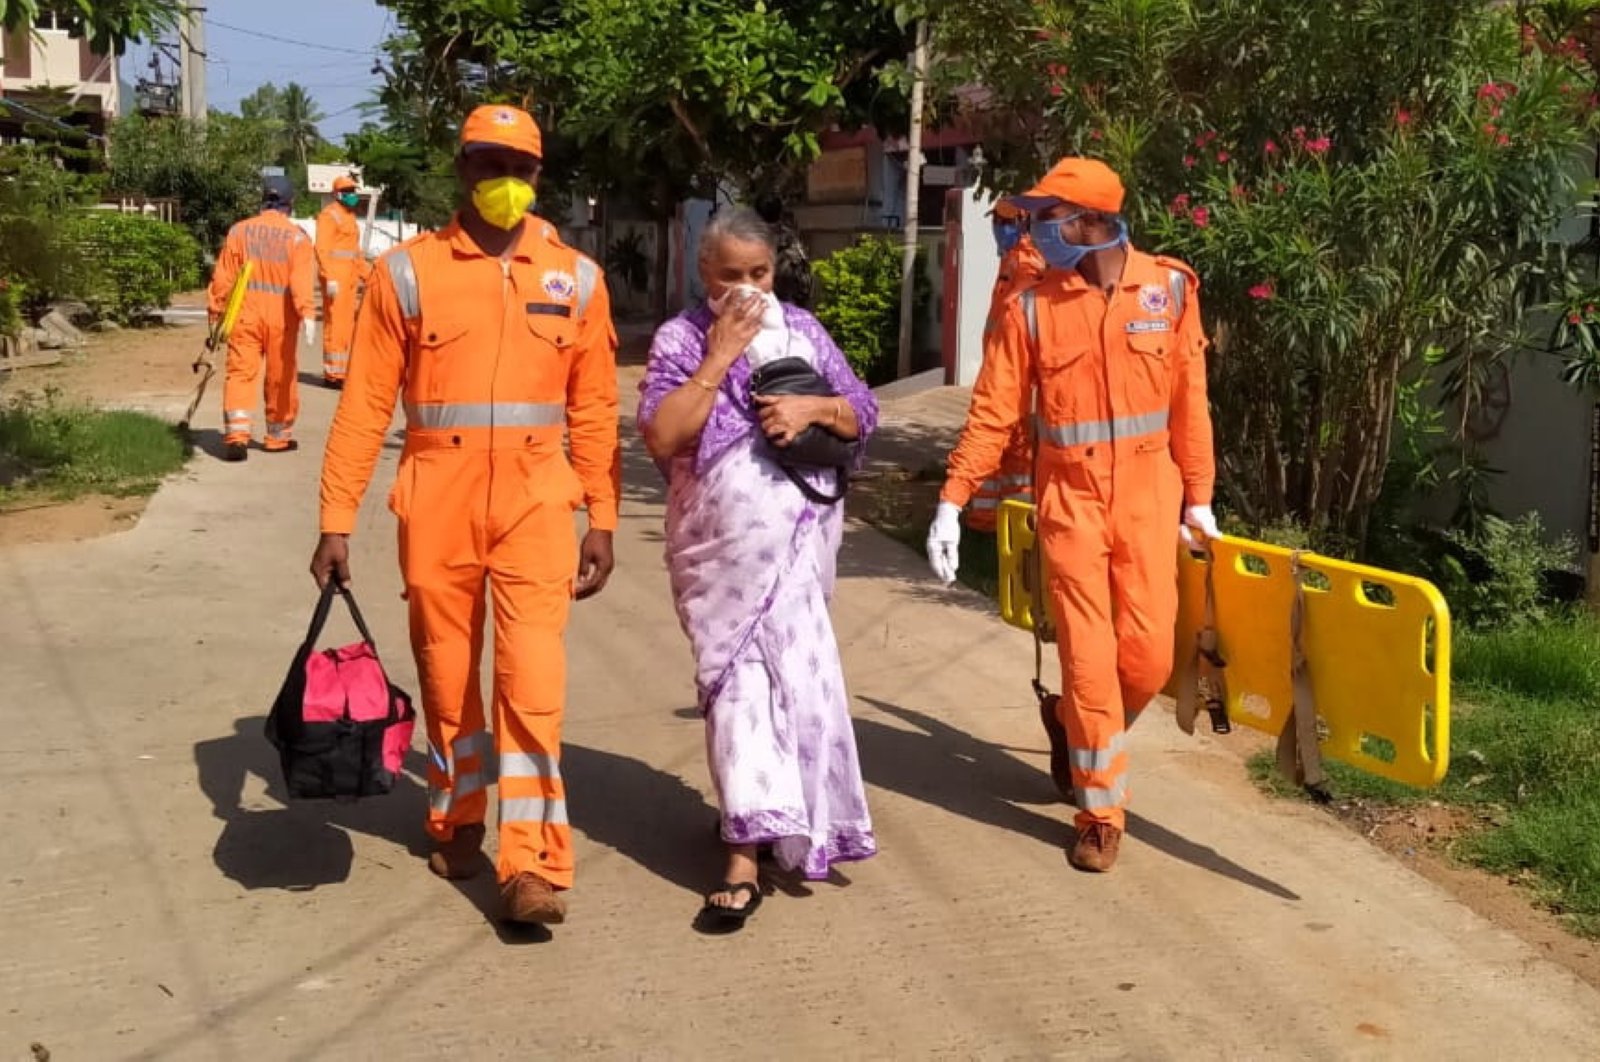 A handout photo made available by the National Disaster Response Force (NDRF) shows personnel during rescue operations after a gas leak at a chemical factory in Visakhapatnam, Andhra Pradesh state, southern India, May 7, 2020. (EPA Photo)